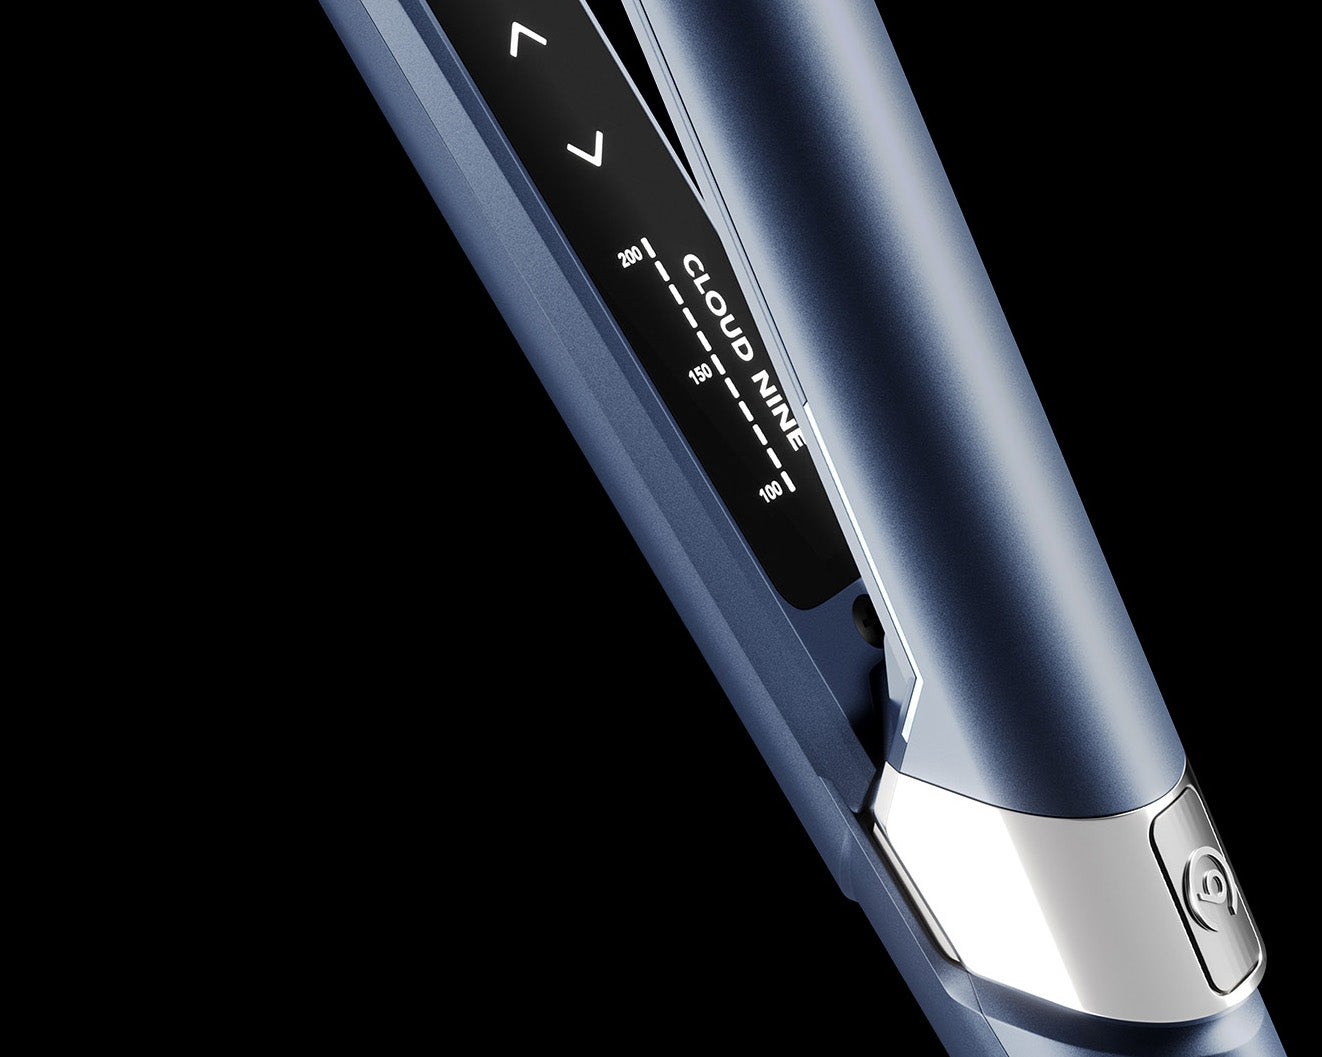 Close up of the variable temperature control setting on the 2-in-1 Contouring Iron Pro.